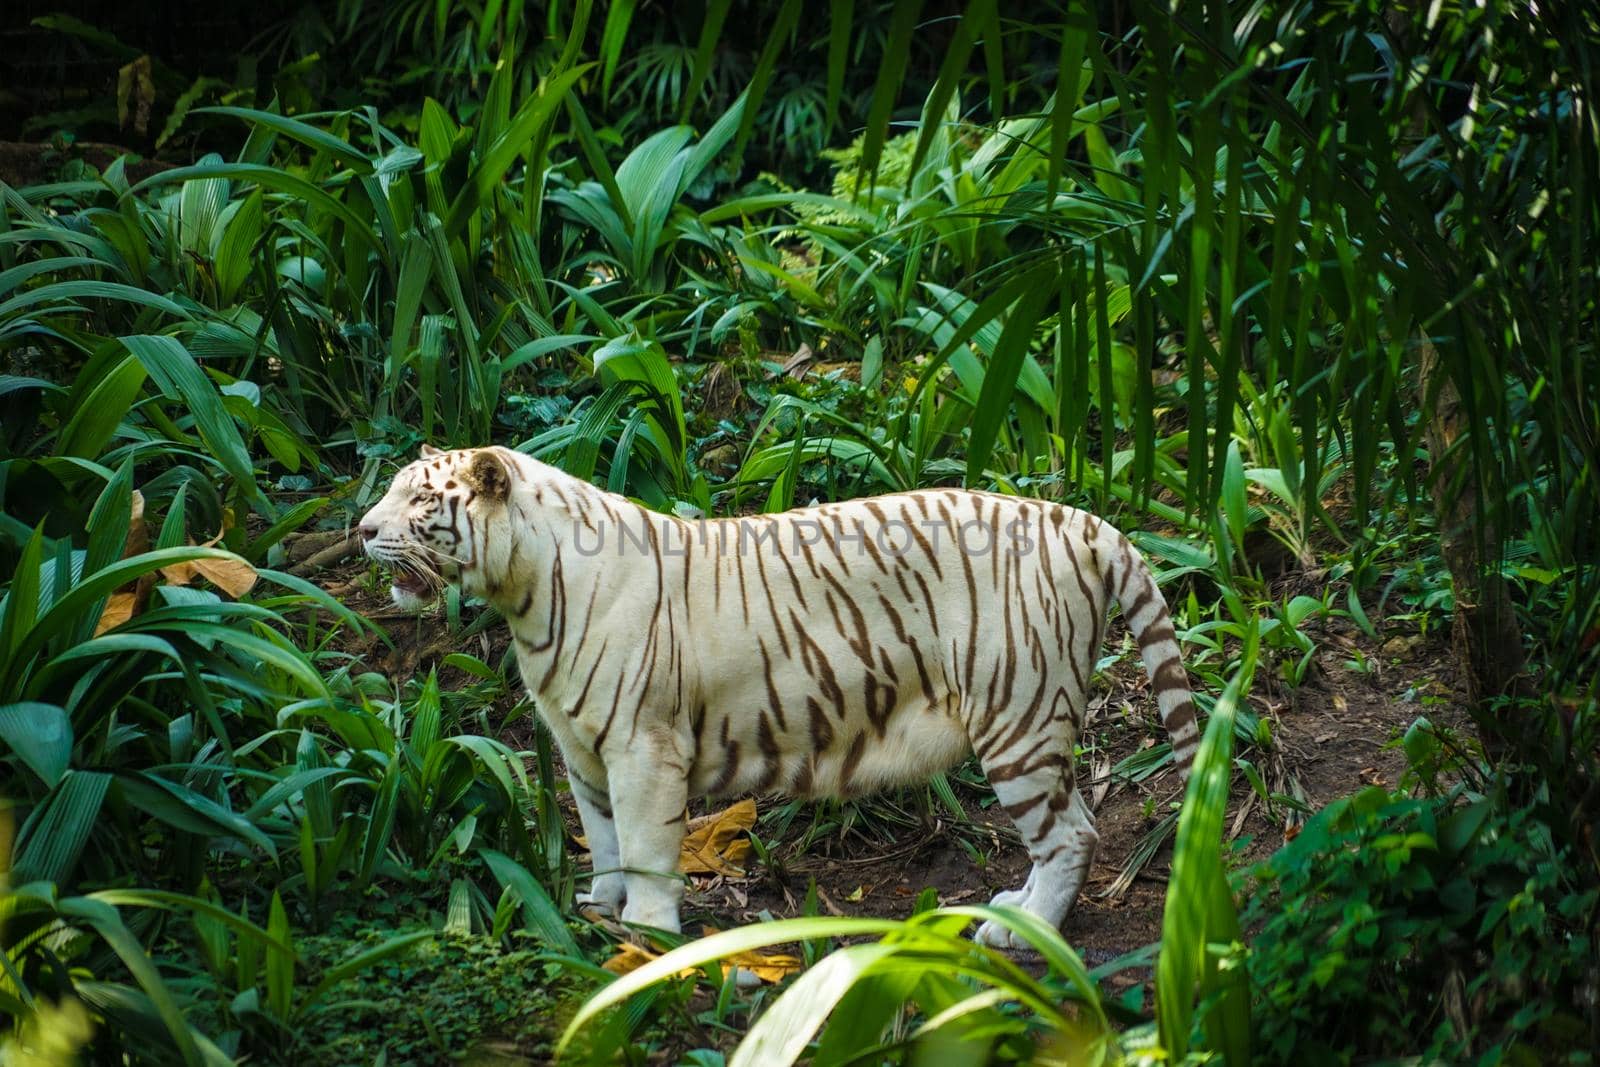 White tiger in jungle. Shooting Location: Singapore